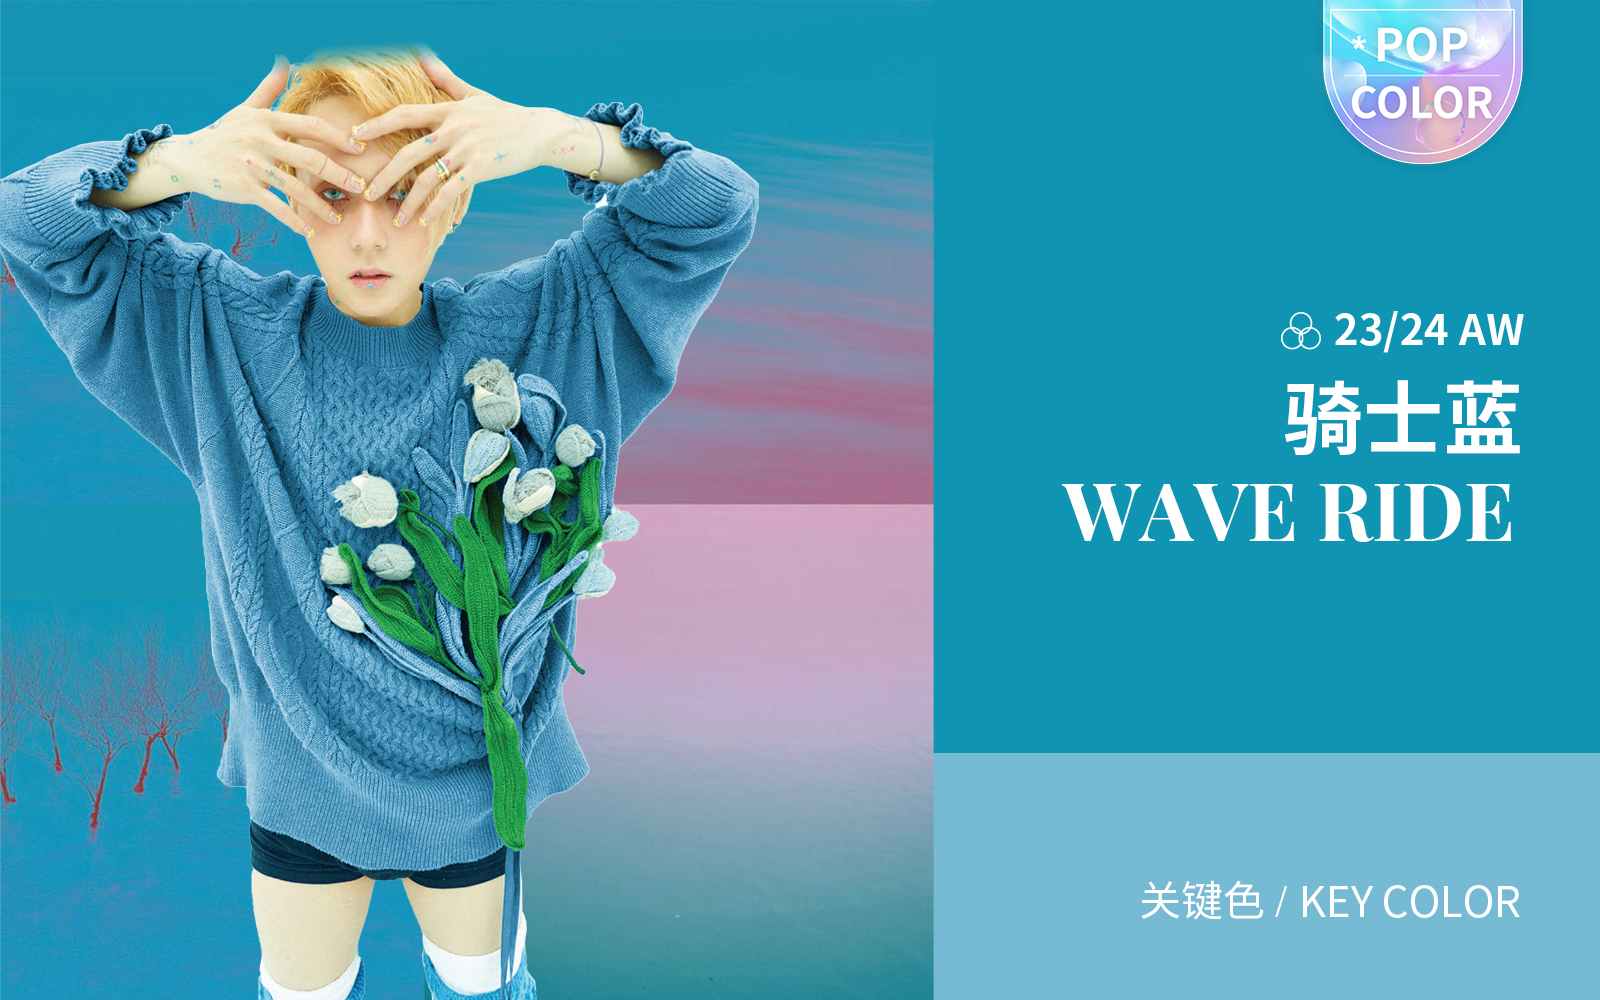 Wave Ride -- The Color Trend for Women's Knitwear(Young Market)